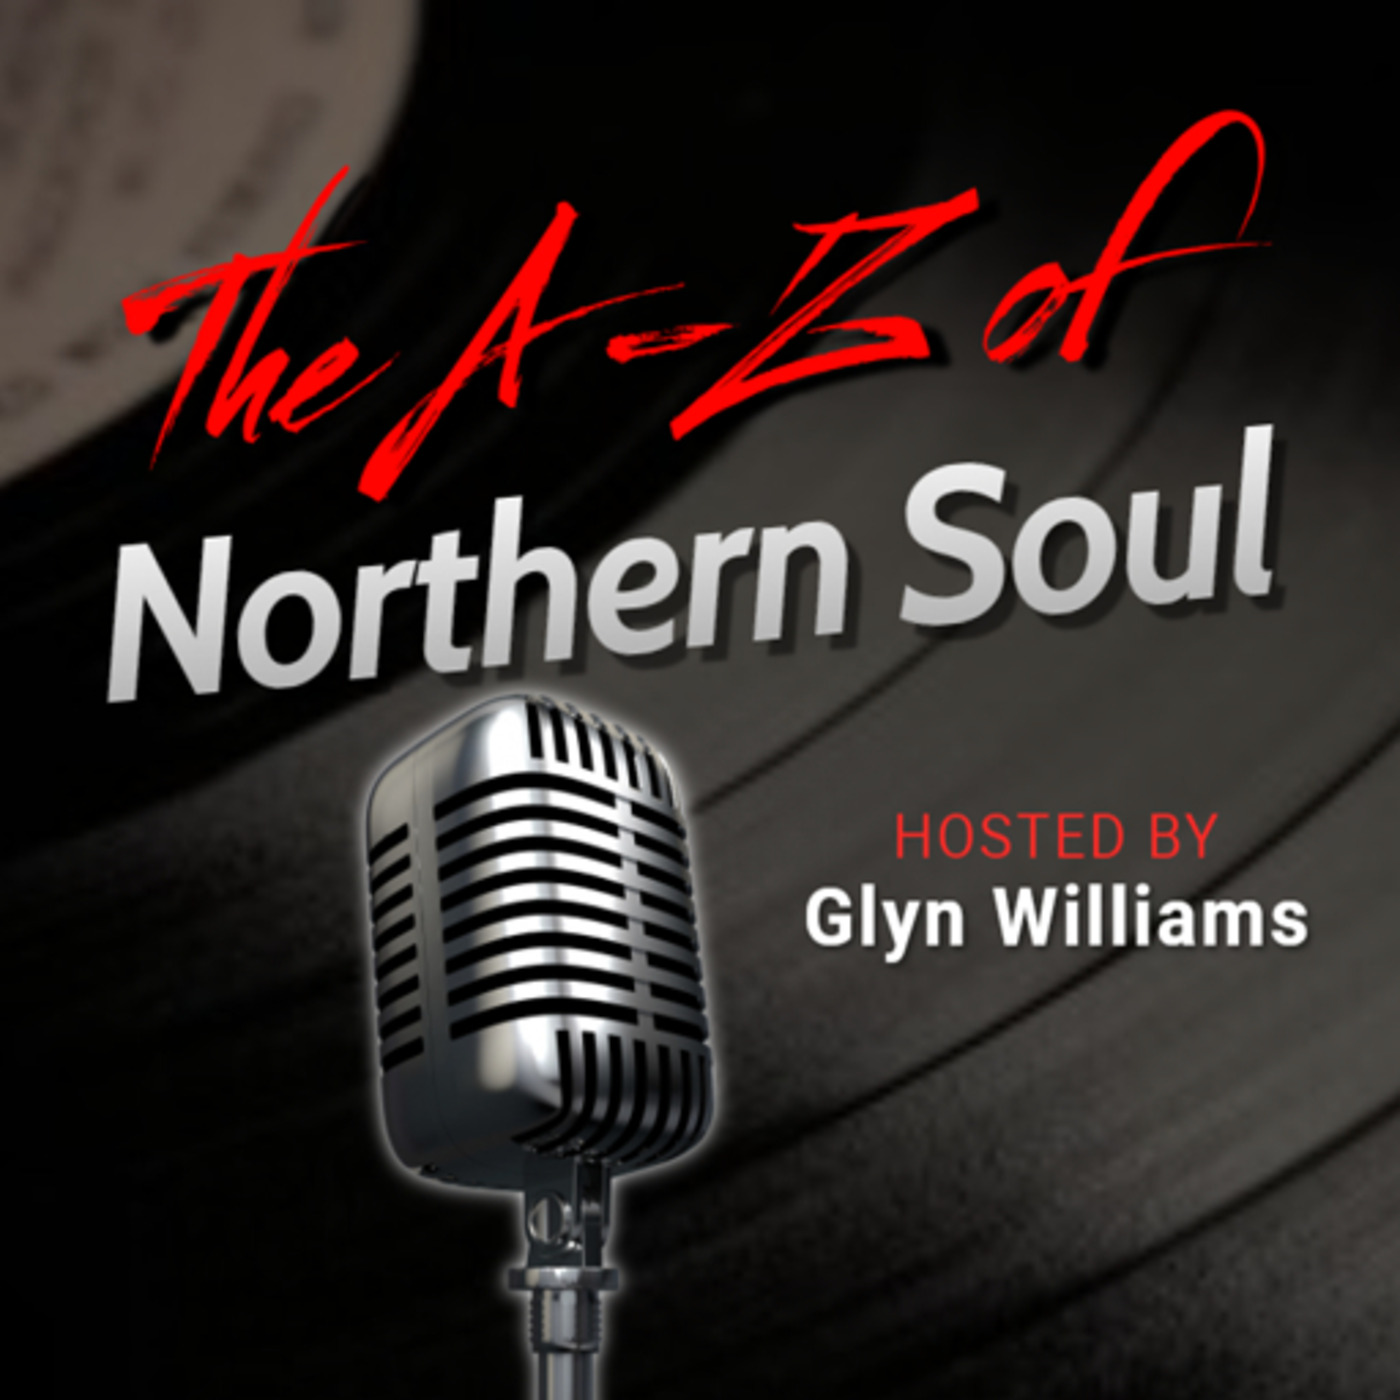 The A-Z of Northern Soul E013